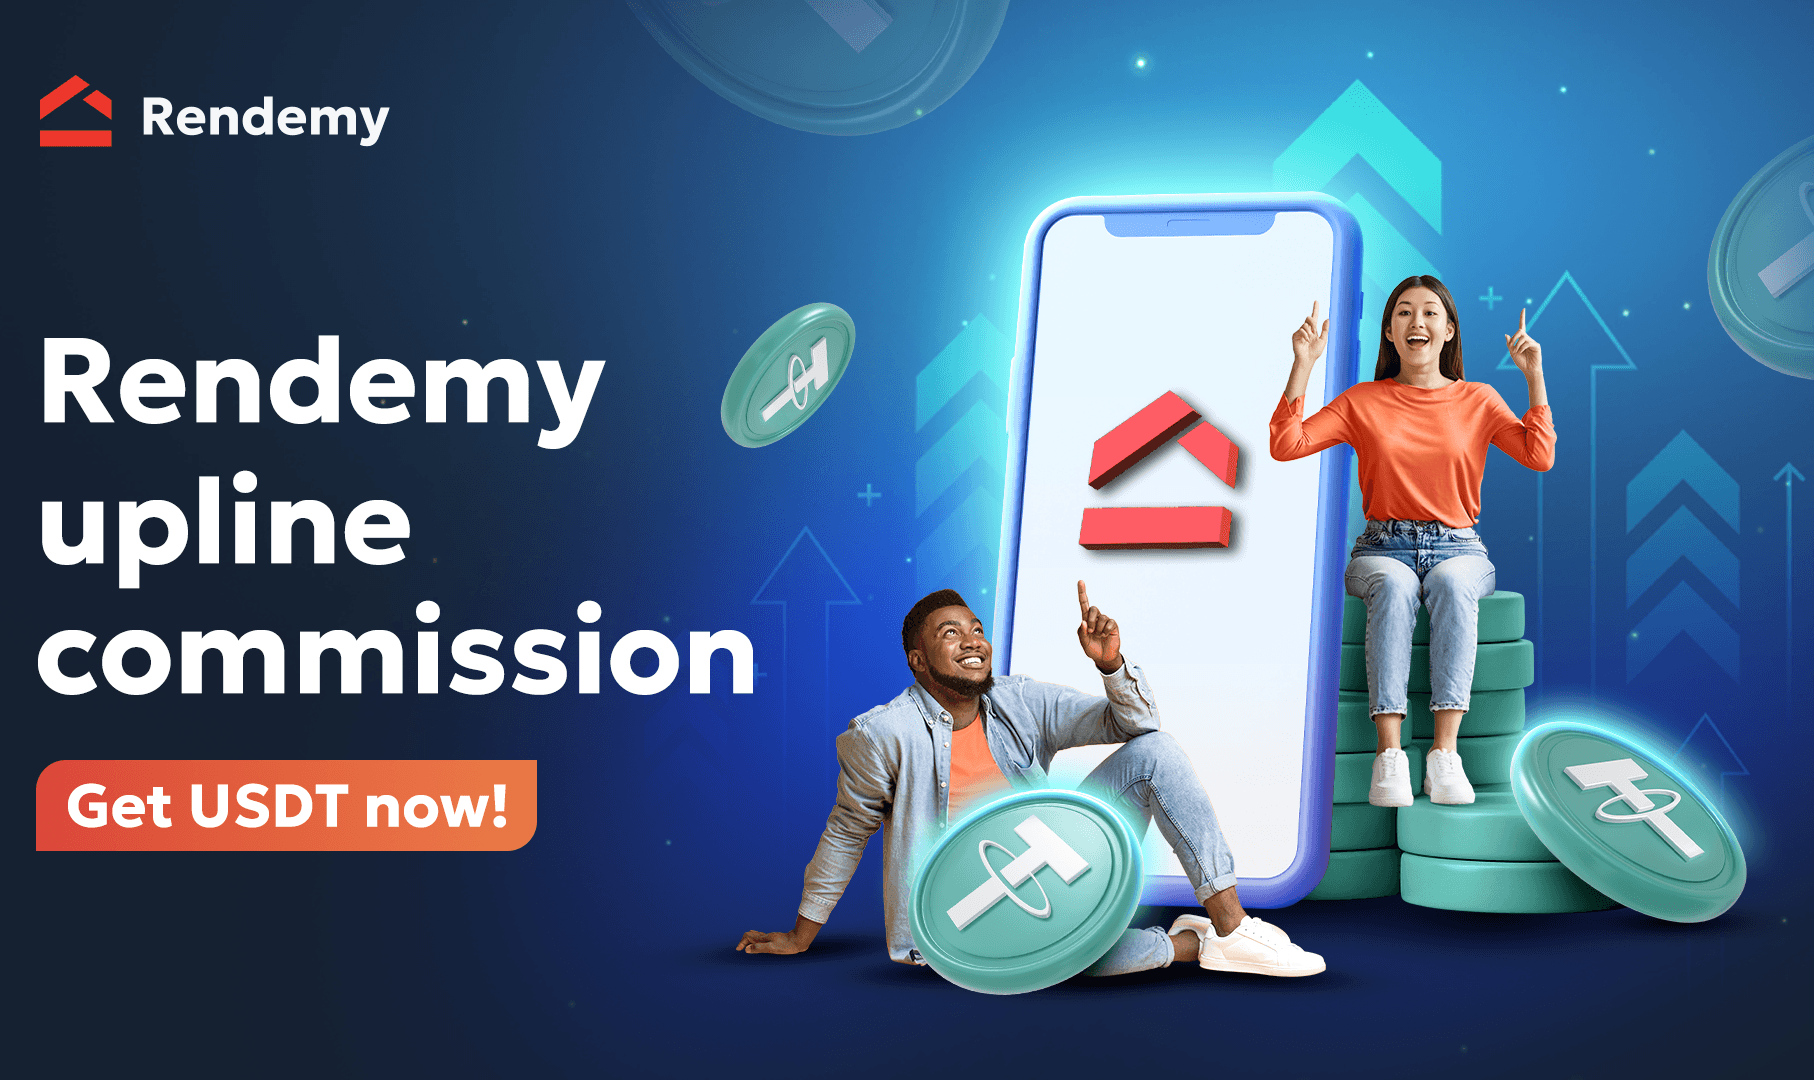 Receive 10% commission in USDT when refer a downline to purchase Rendemy course avatar